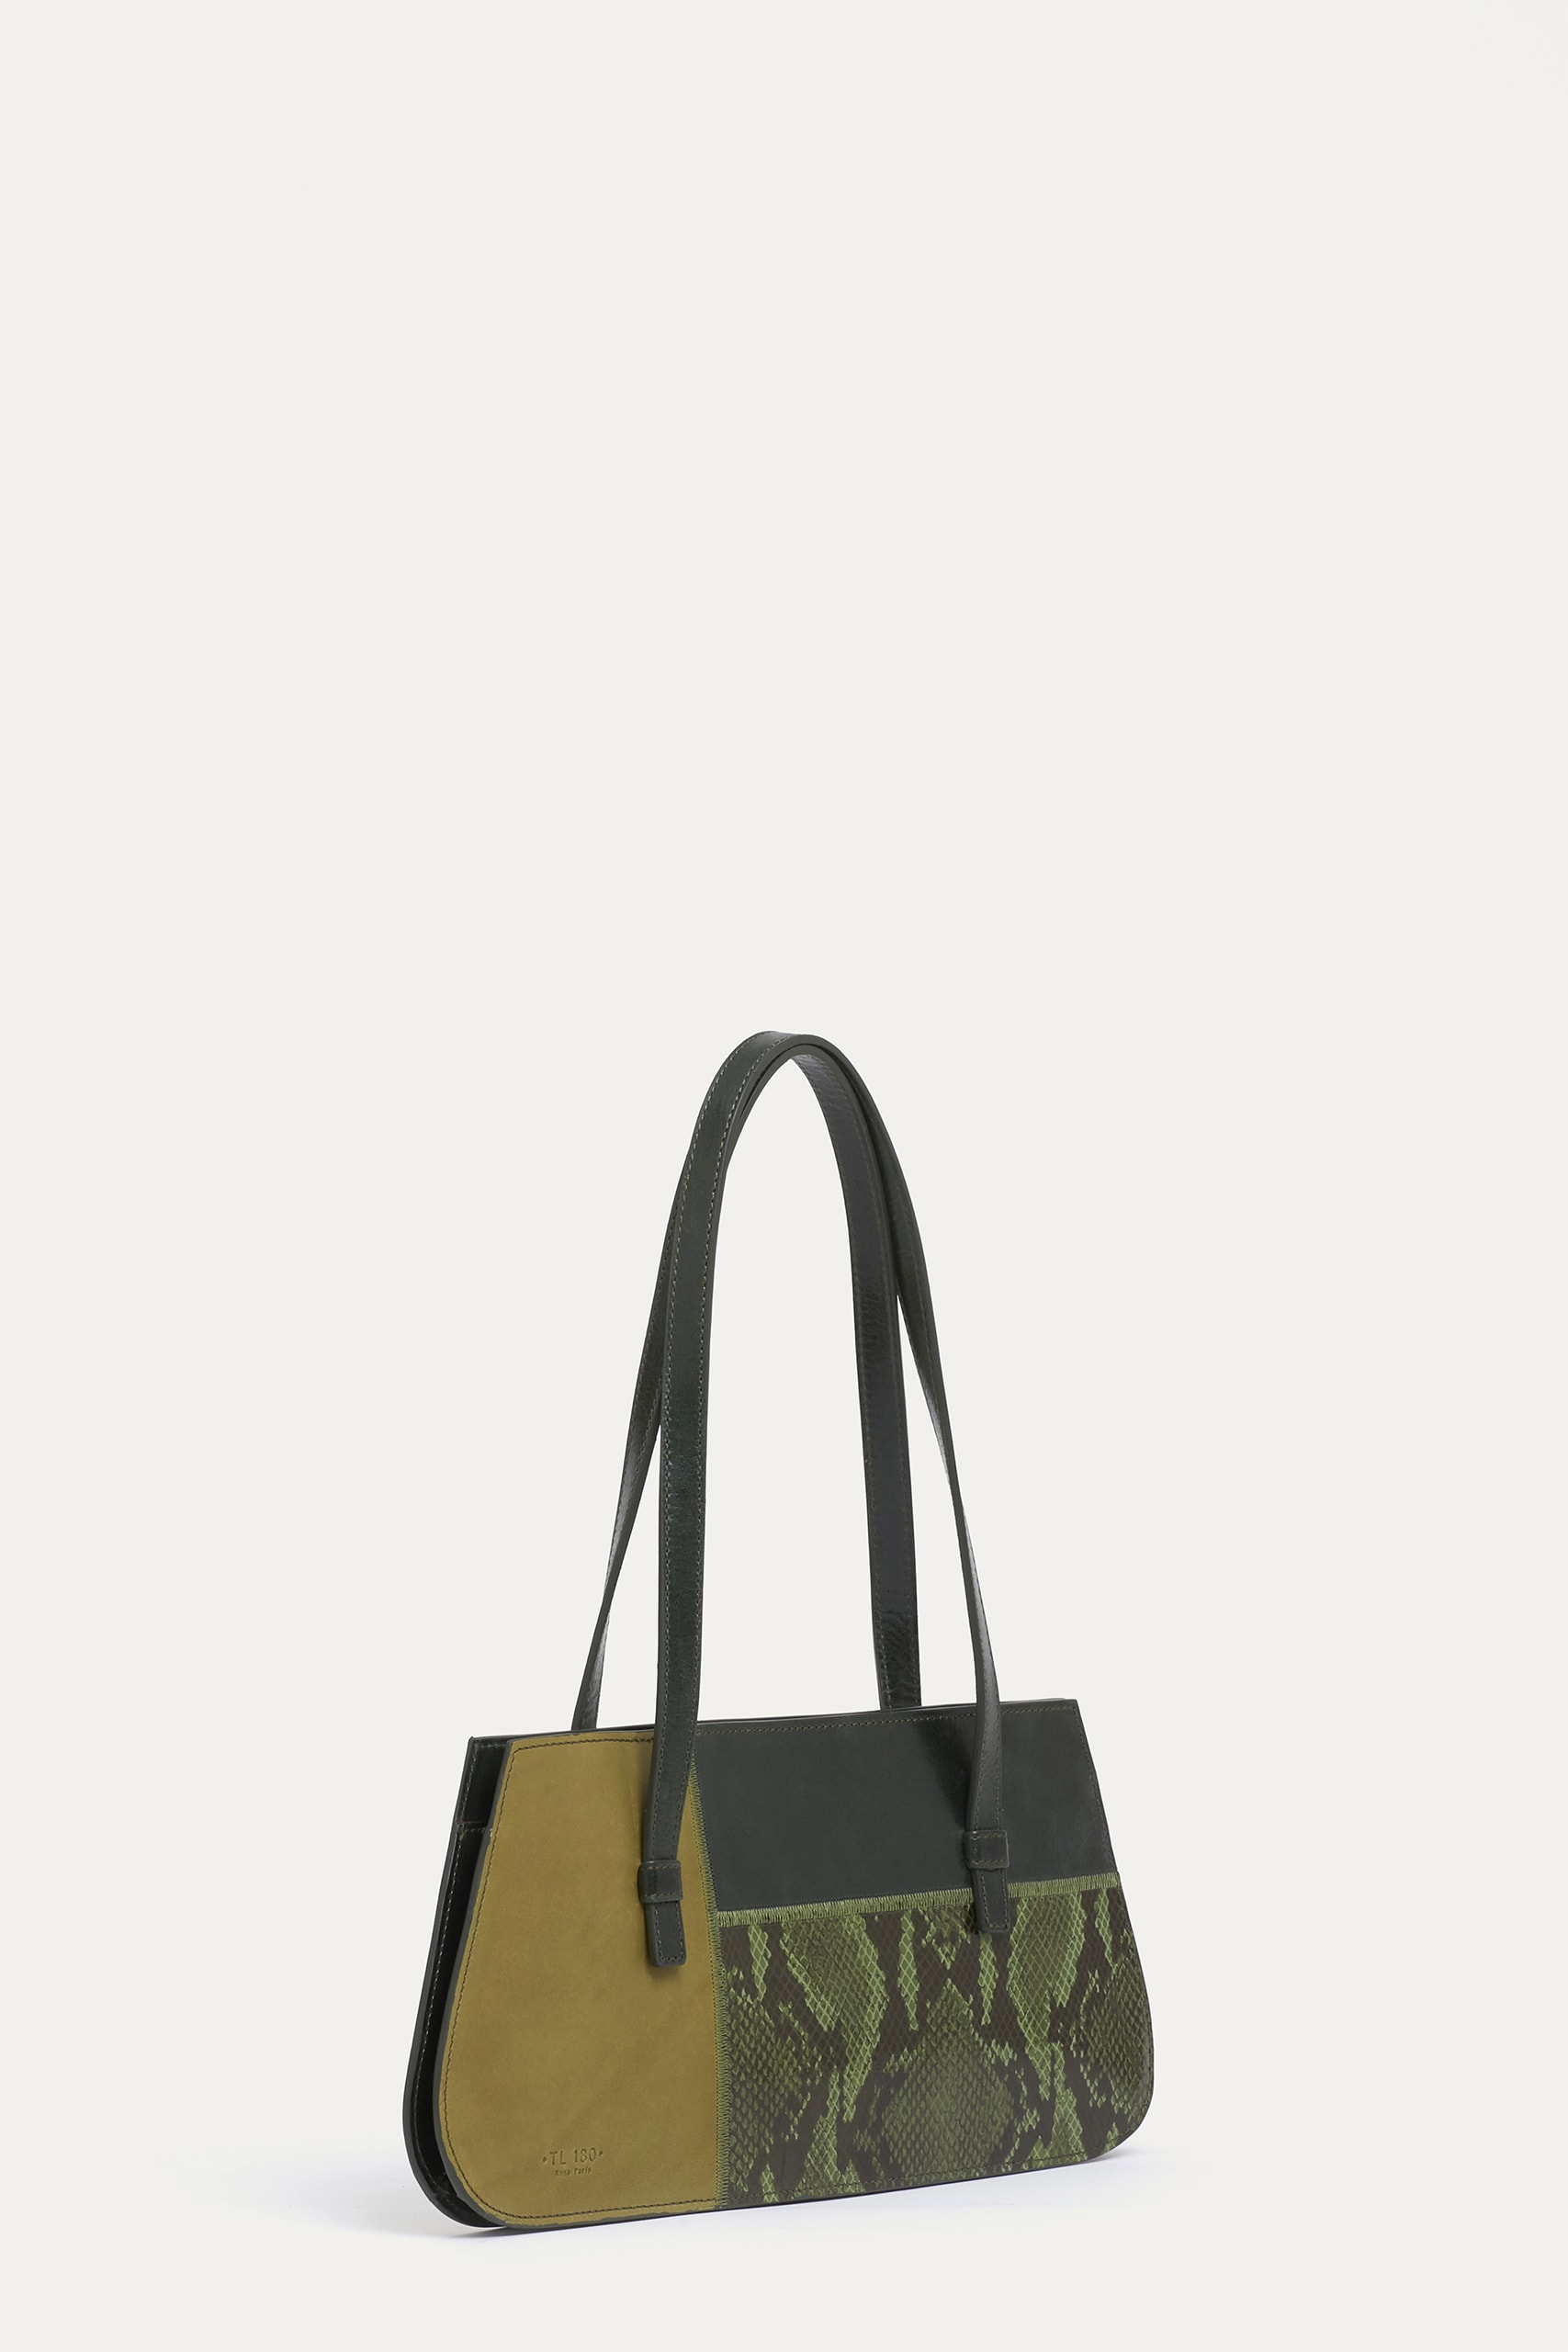 TL180 0058 BAGS ANOUK LUNGA PATCHWORK GREEN 02